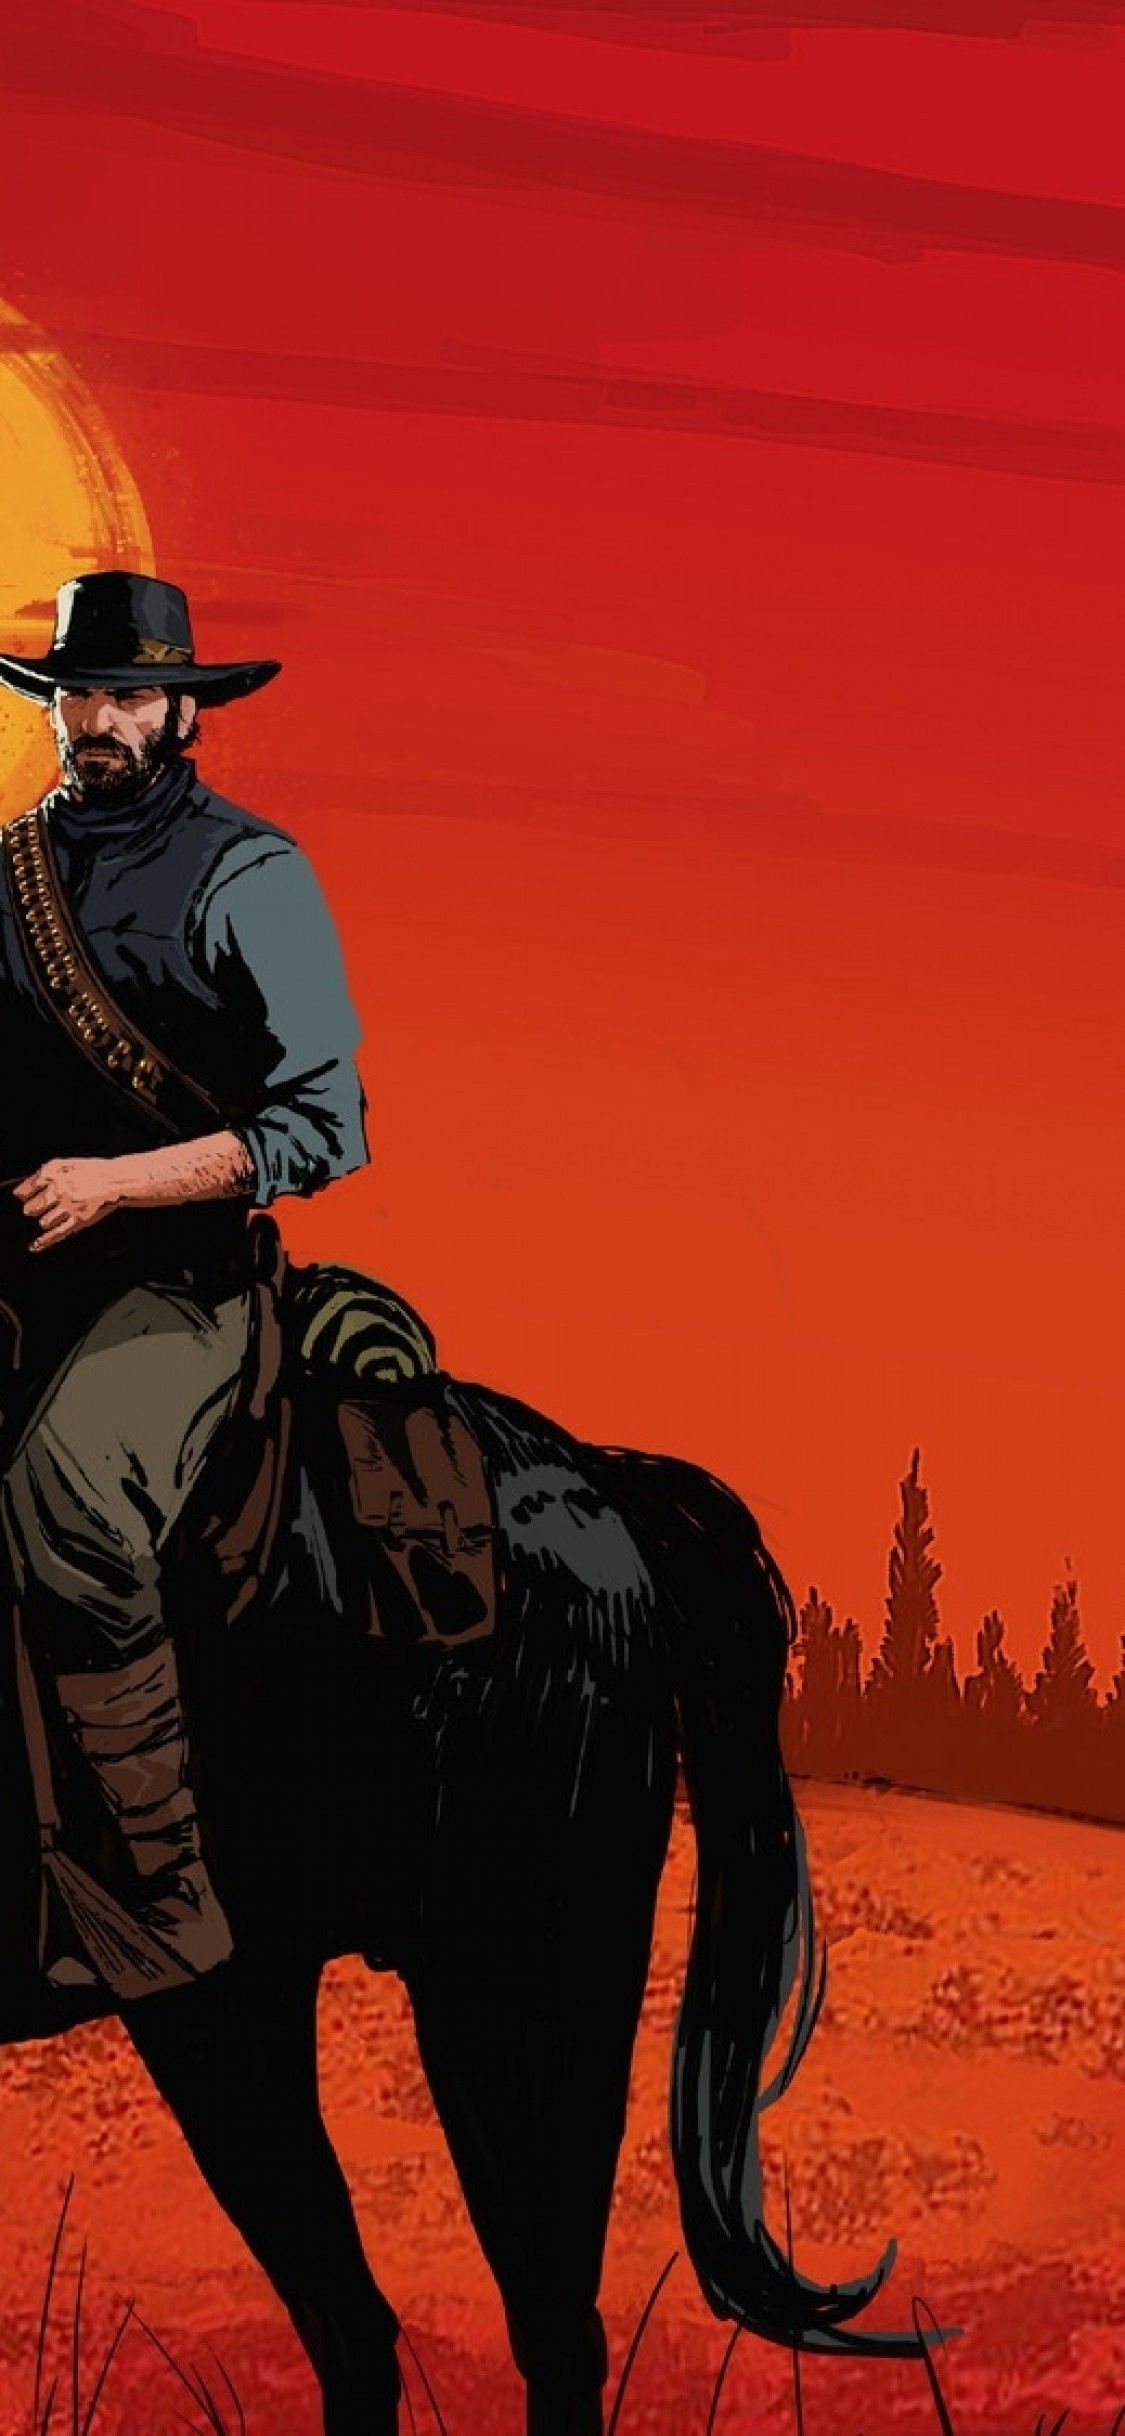 Download 1125x2436 Red Dead Redemption Artwork, Horses, Rdr2 Wallpaper for iPhone X